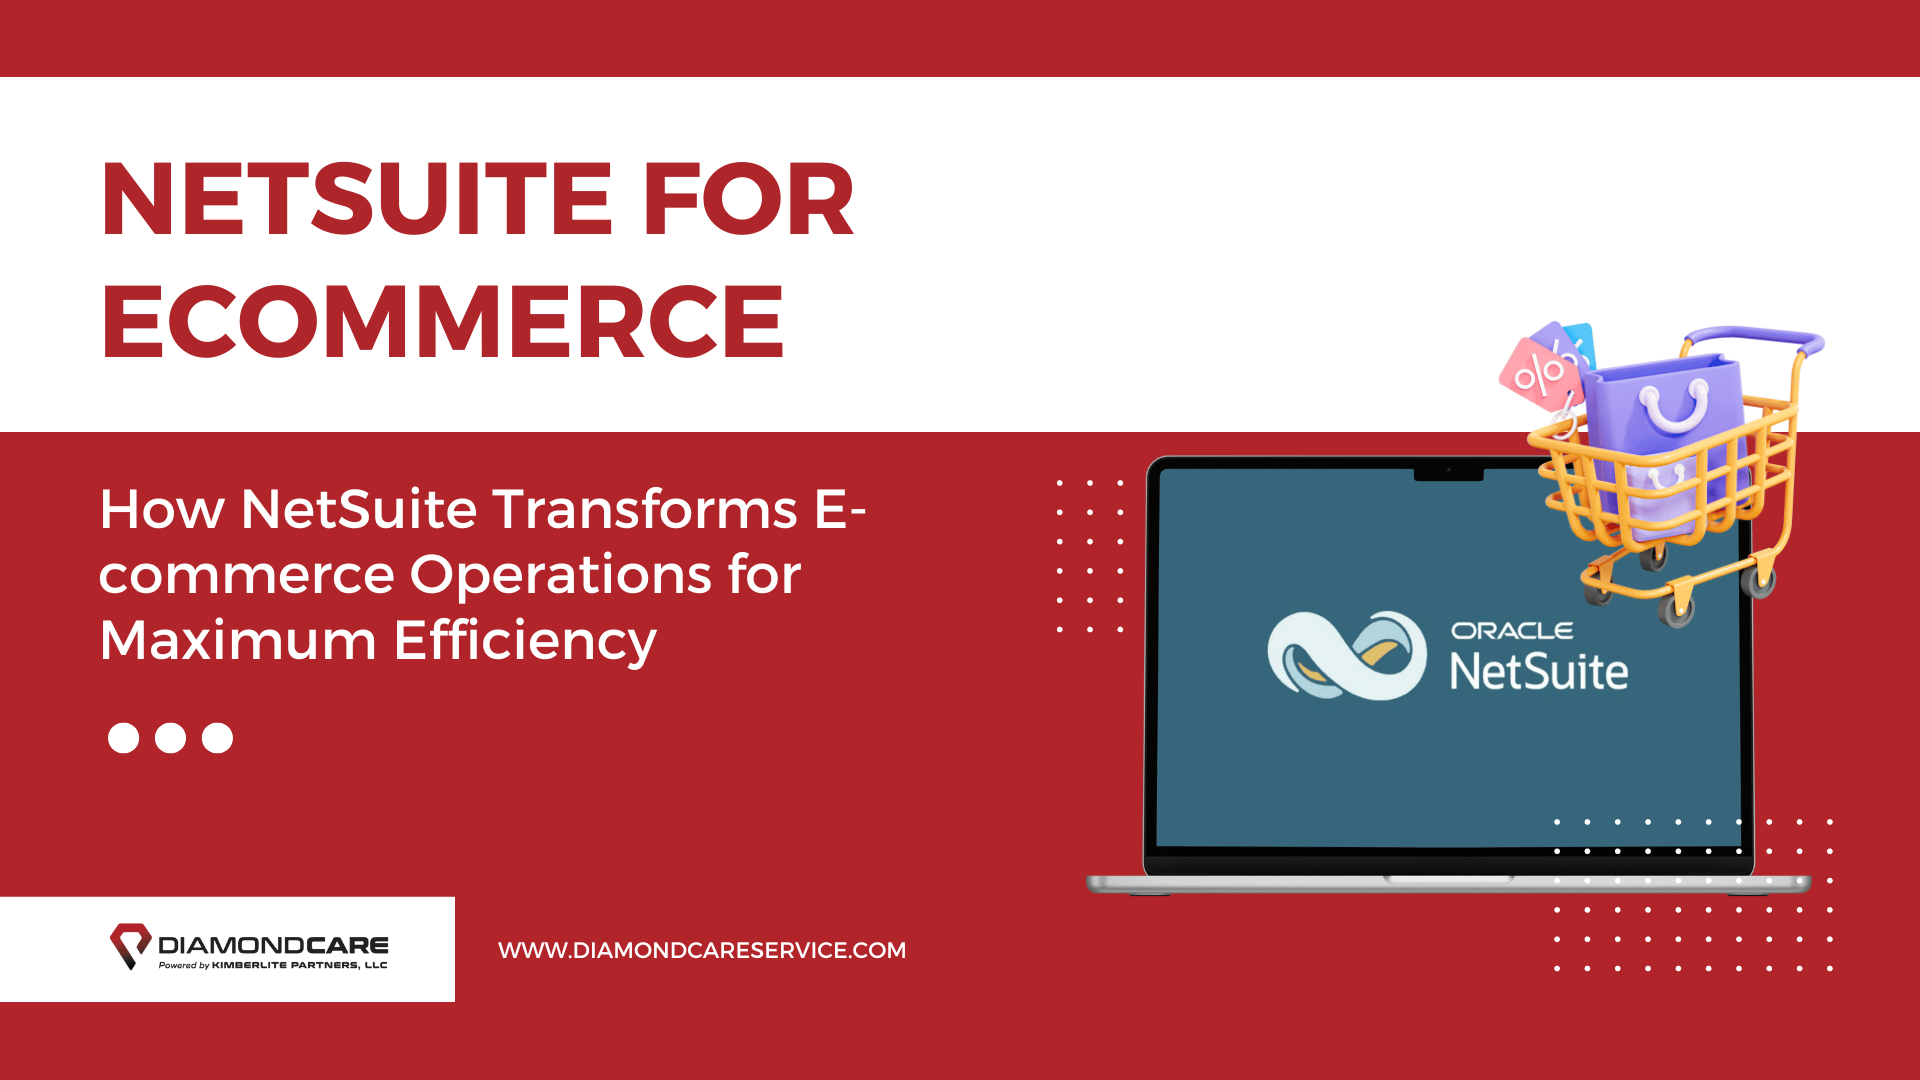 NetSuite for Ecommerce: How NetSuite Transforms E-commerce Operations for Maximum Efficiency